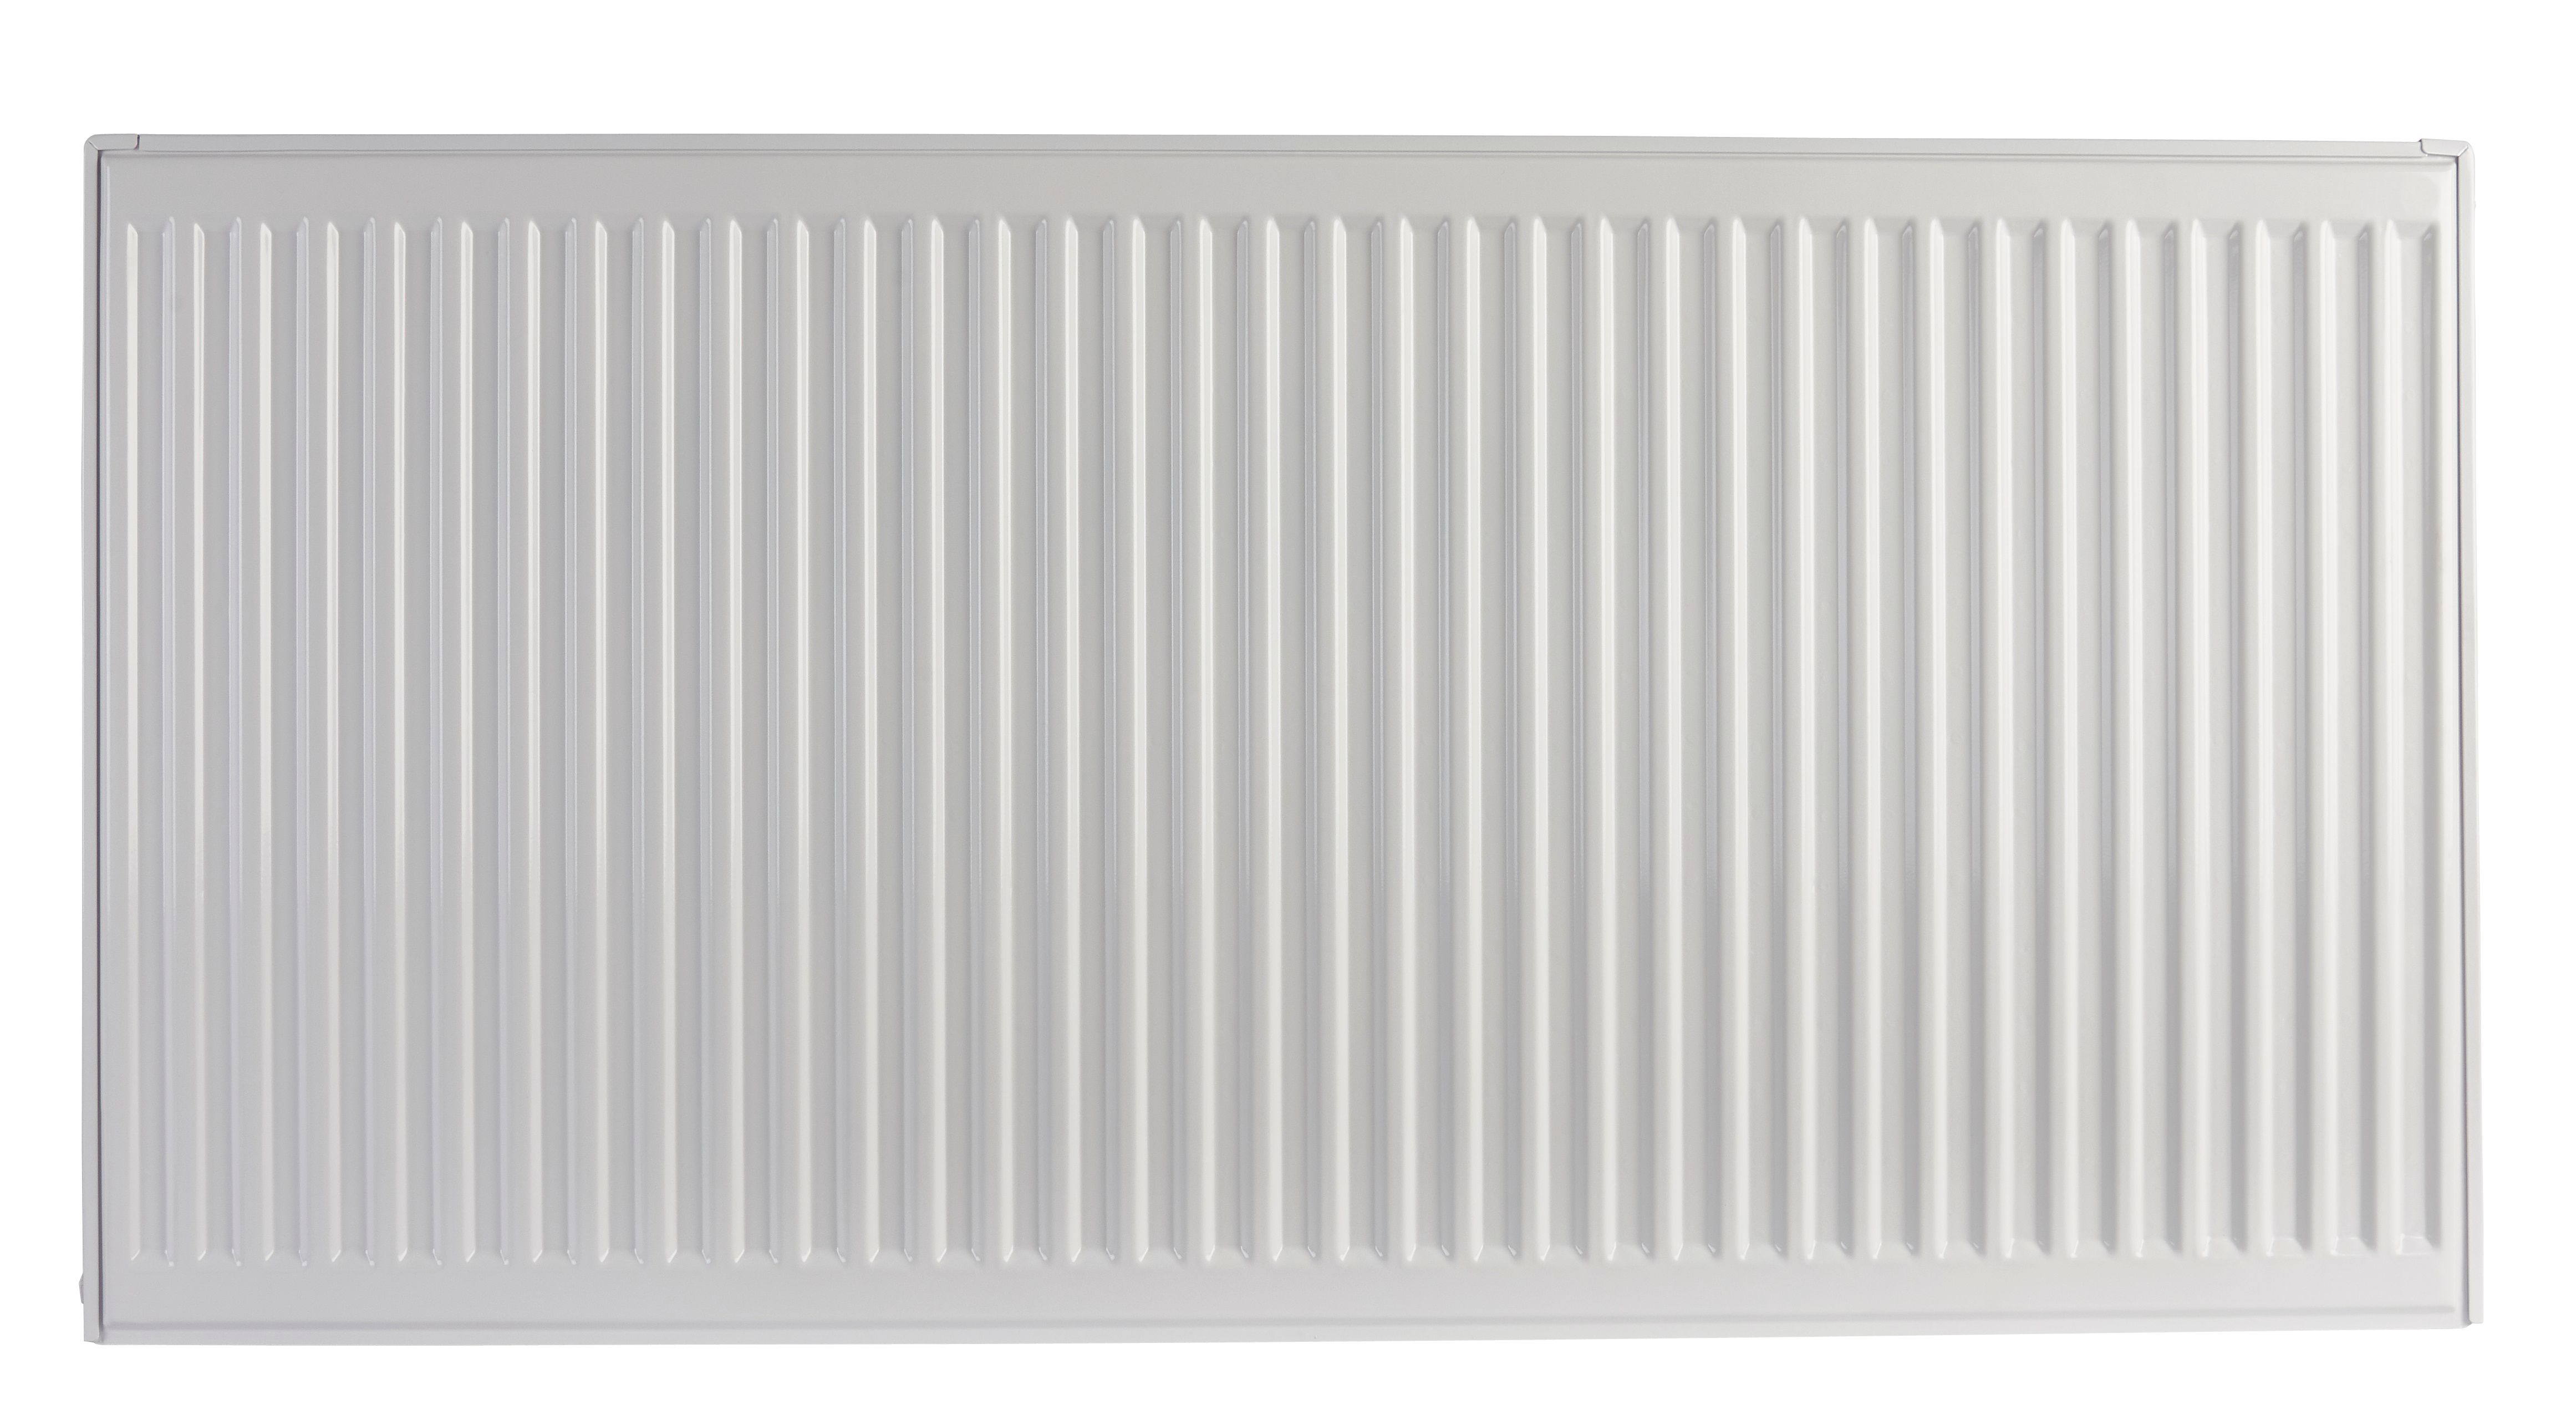 Image of Homeline by Stelrad 500 x 900mm Type 21 Double Panel Plus Single Convector Radiator